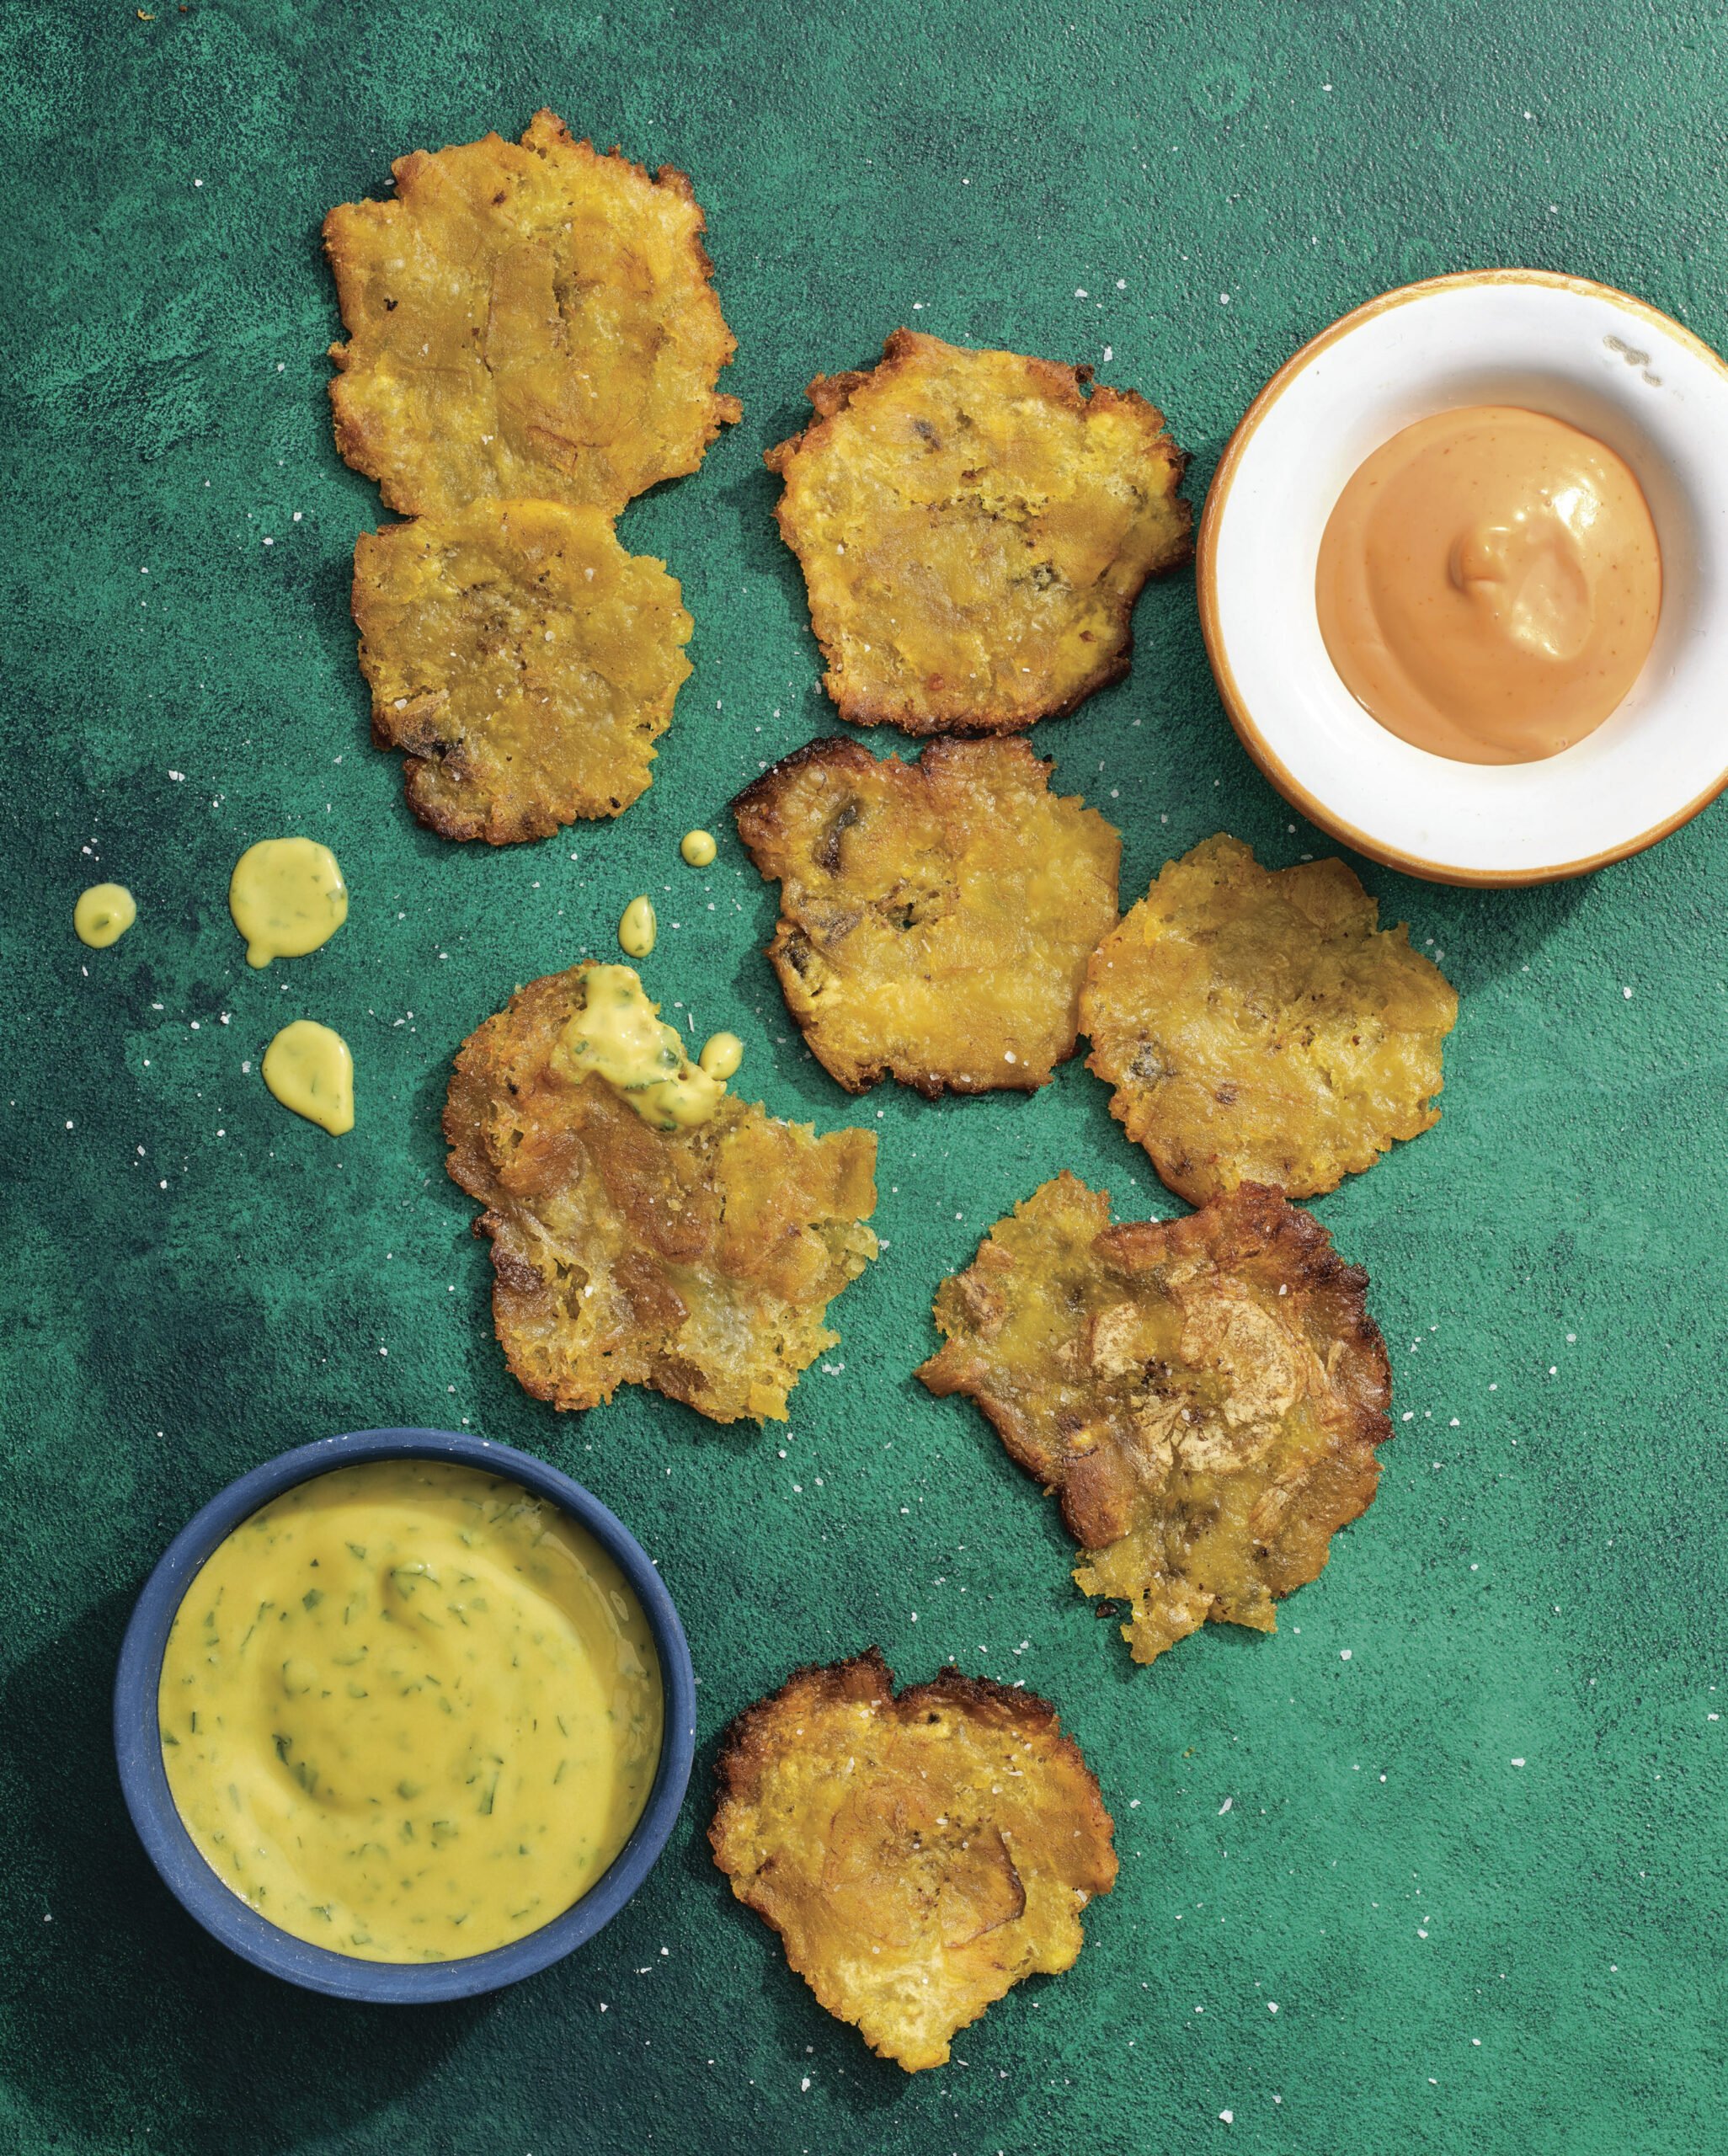 Tostones excerpted from Diasporican: A Puerto Rican Cookbook by Illyanna Maisonet.